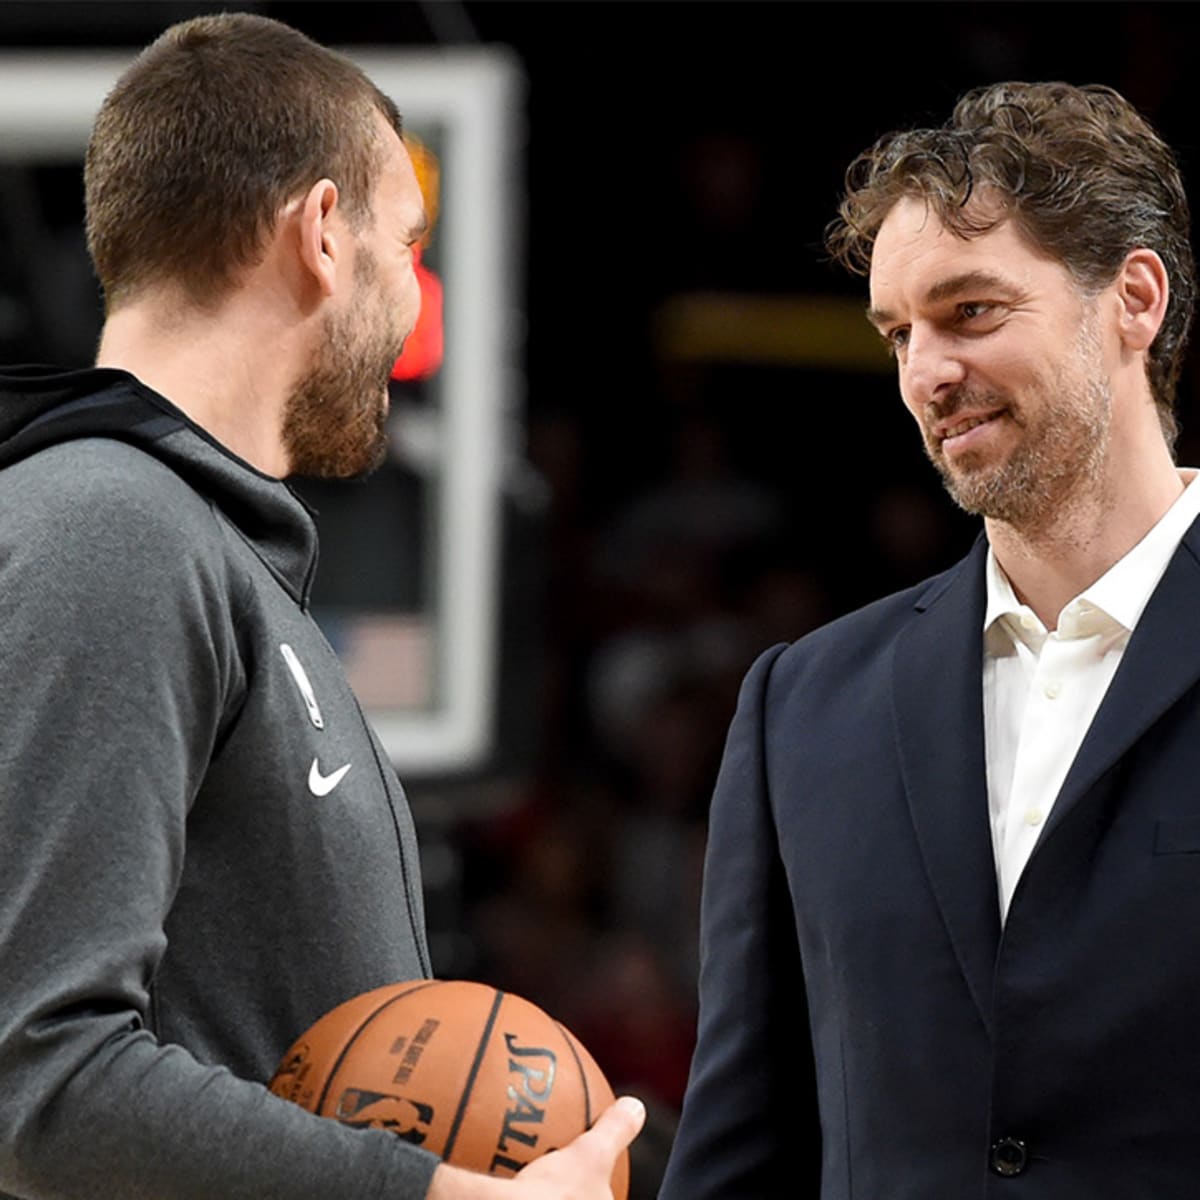 Sights and Sounds from Pau Gasol's Lakers jersey retirement in Los Angeles